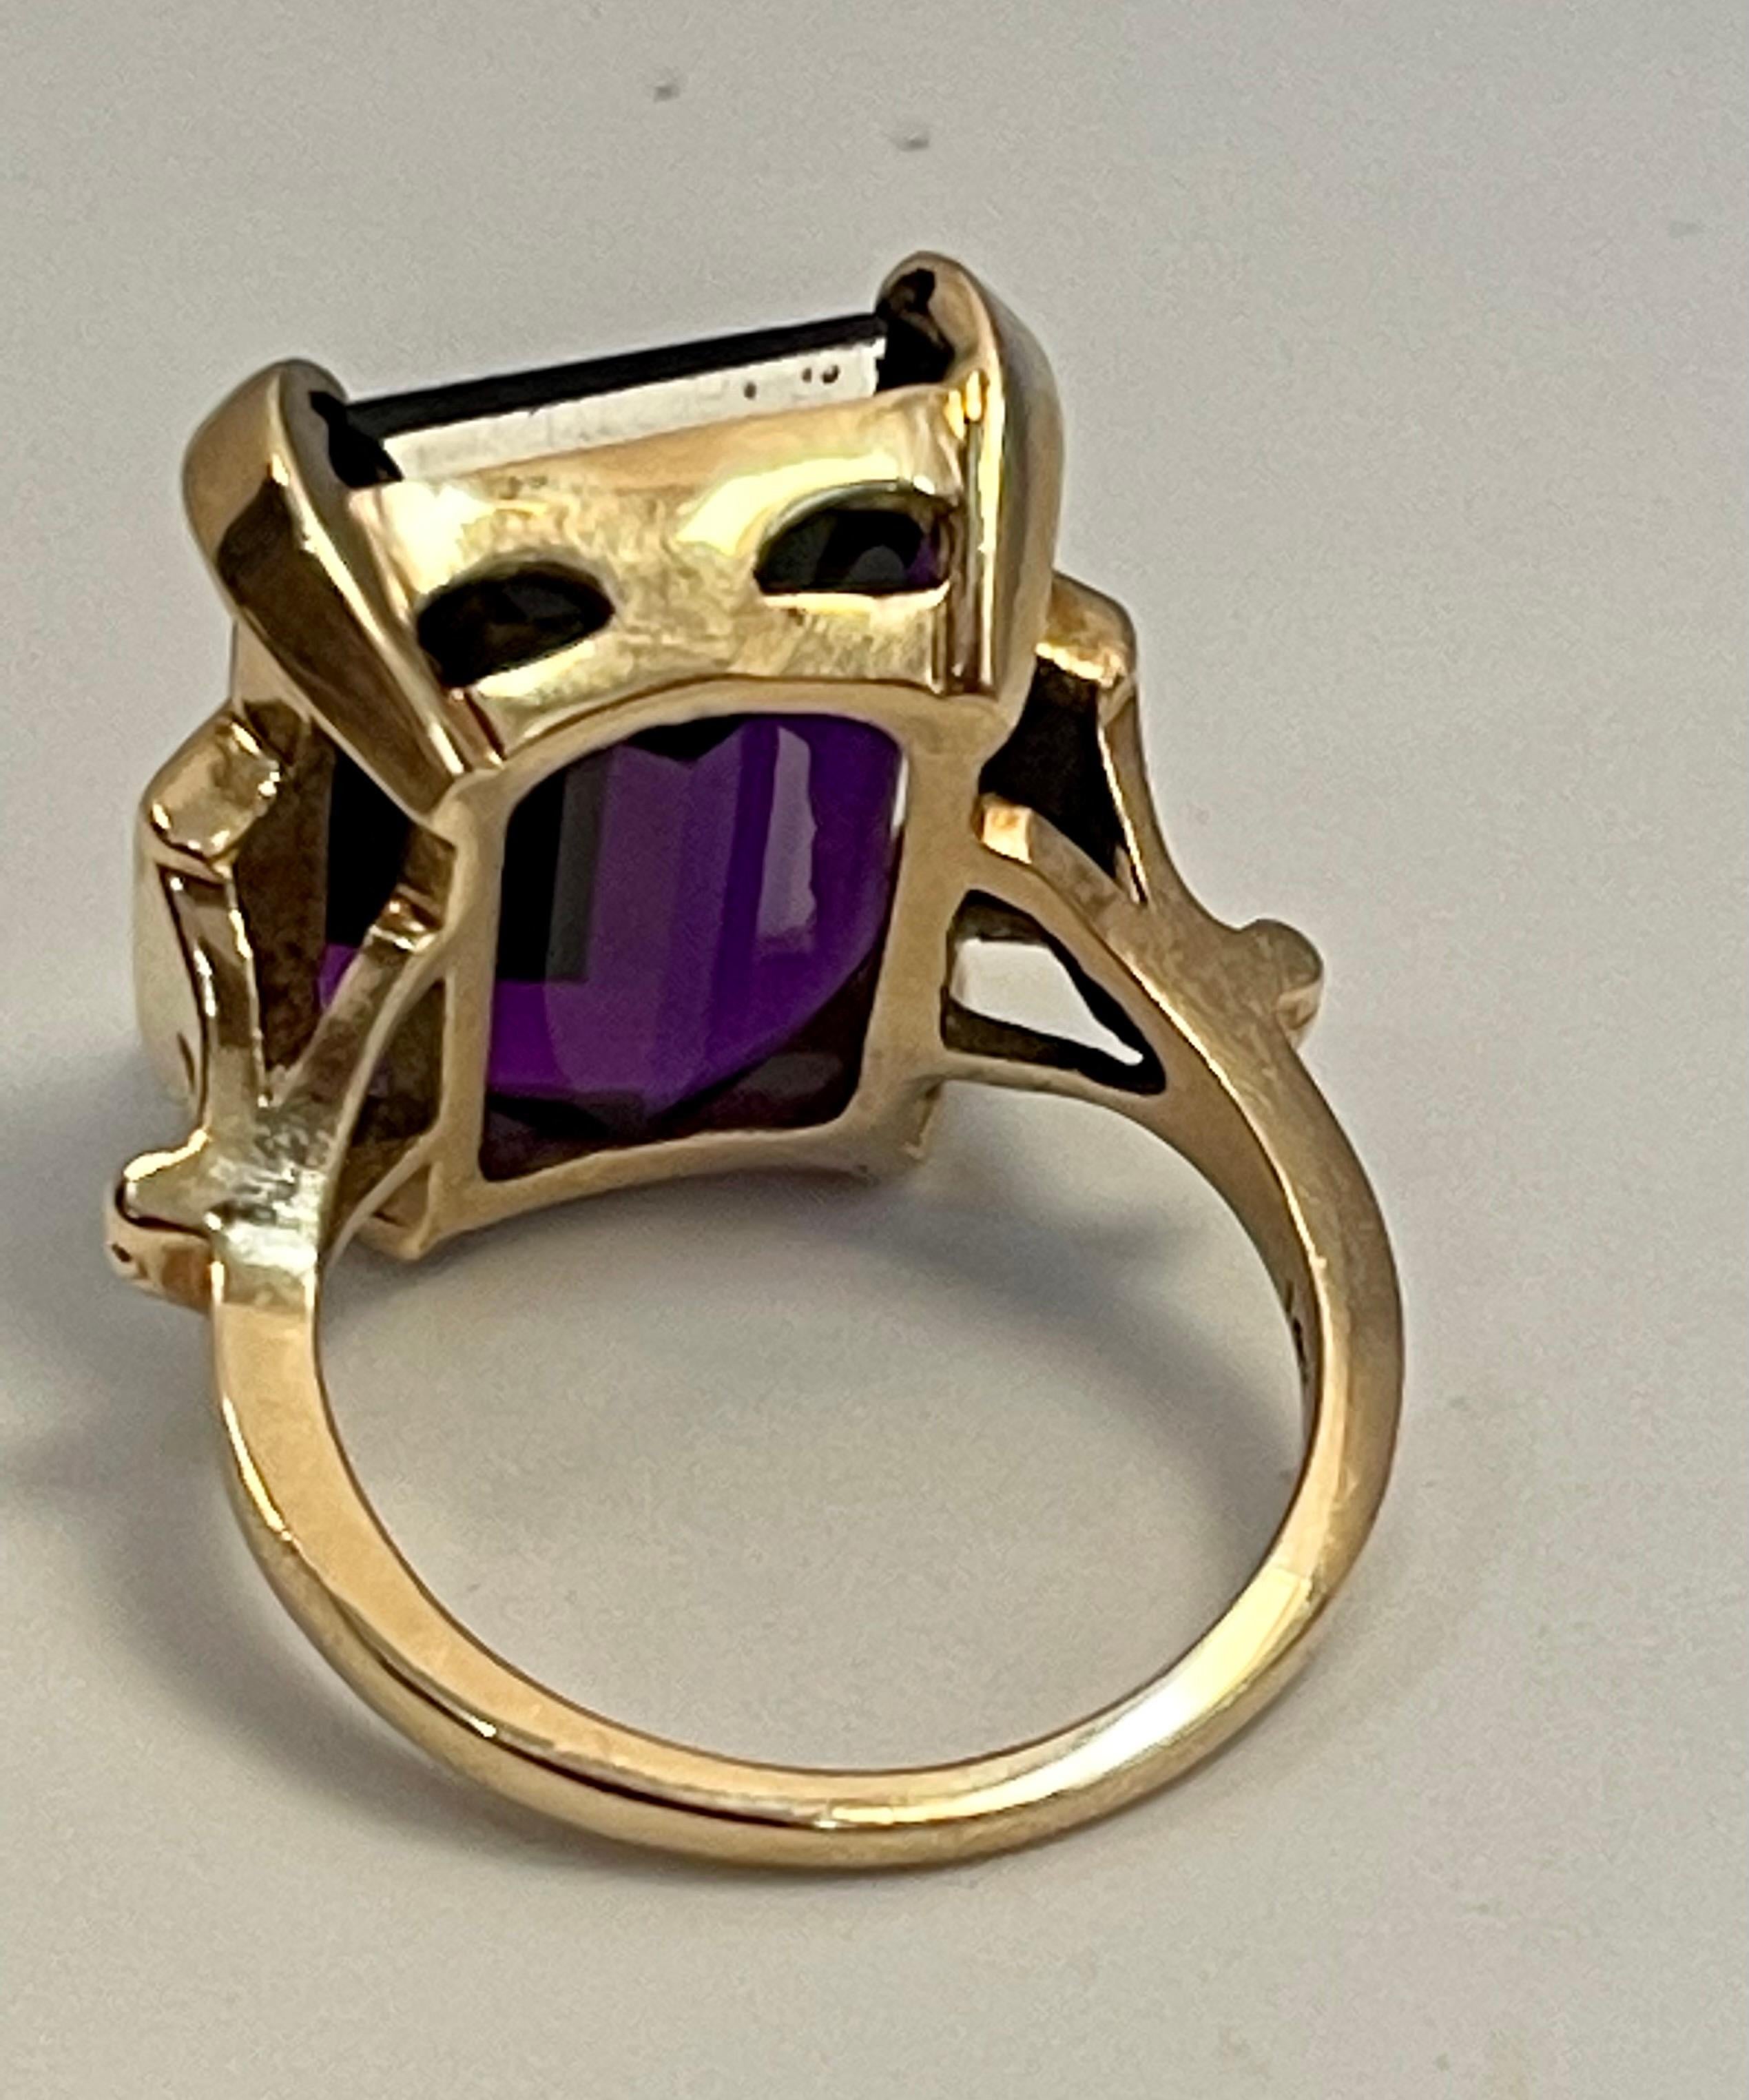 15 Carat Emerald Cut Amethyst Cocktail Ring in 14 Karat Yellow Gold For Sale 5